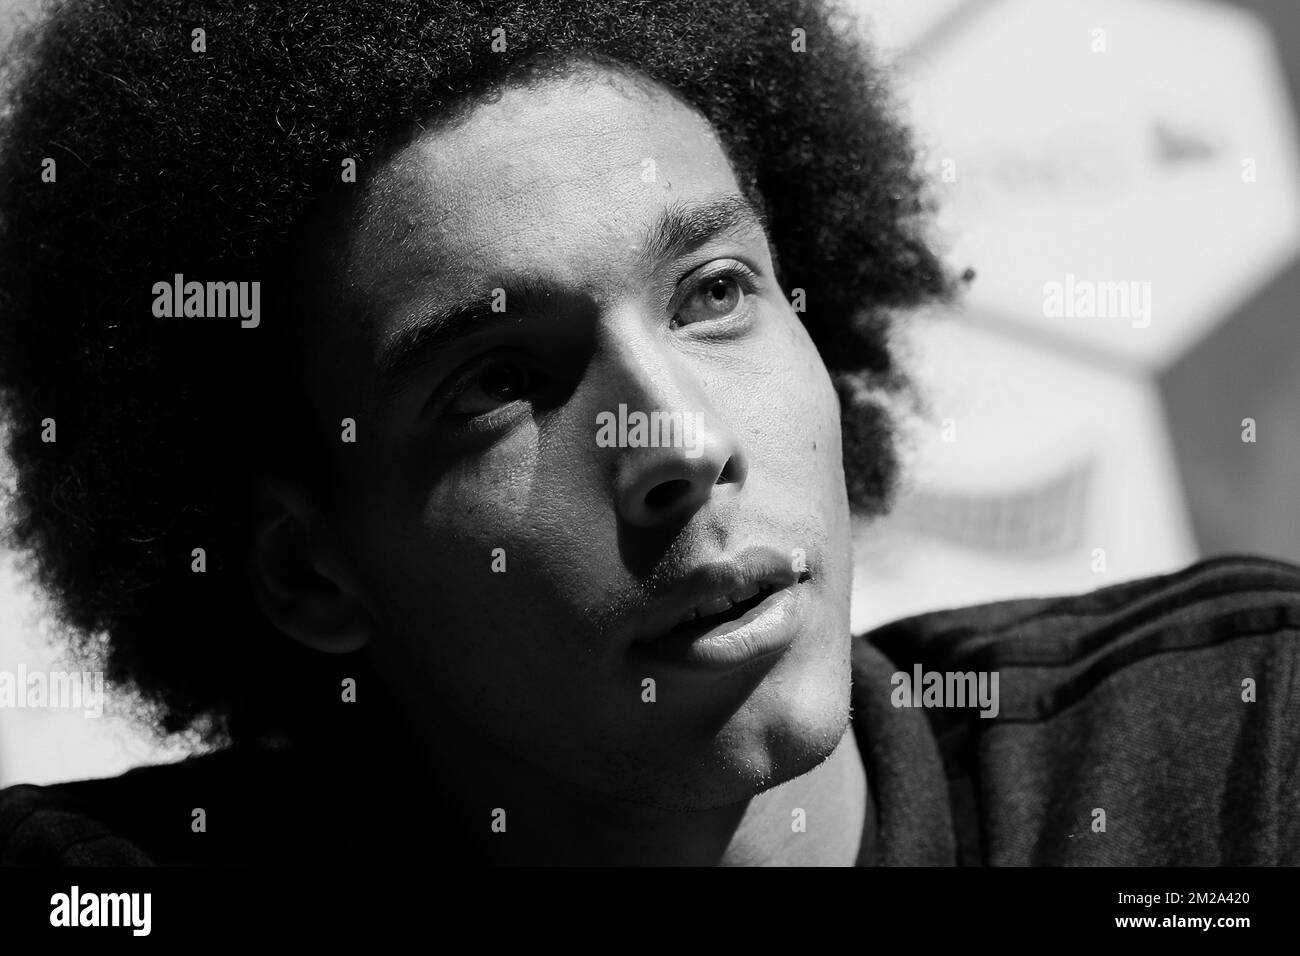 Belgium's Axel Witsel pictured during a press conference of Belgian national soccer team Red Devils, Wednesday 04 October 2017, in Tubize. The team is preparing for World Cup qualification games against Bosnia on Saturday, and Cyprus on Monday. BELGA PHOTO BRUNO FAHY Stock Photo